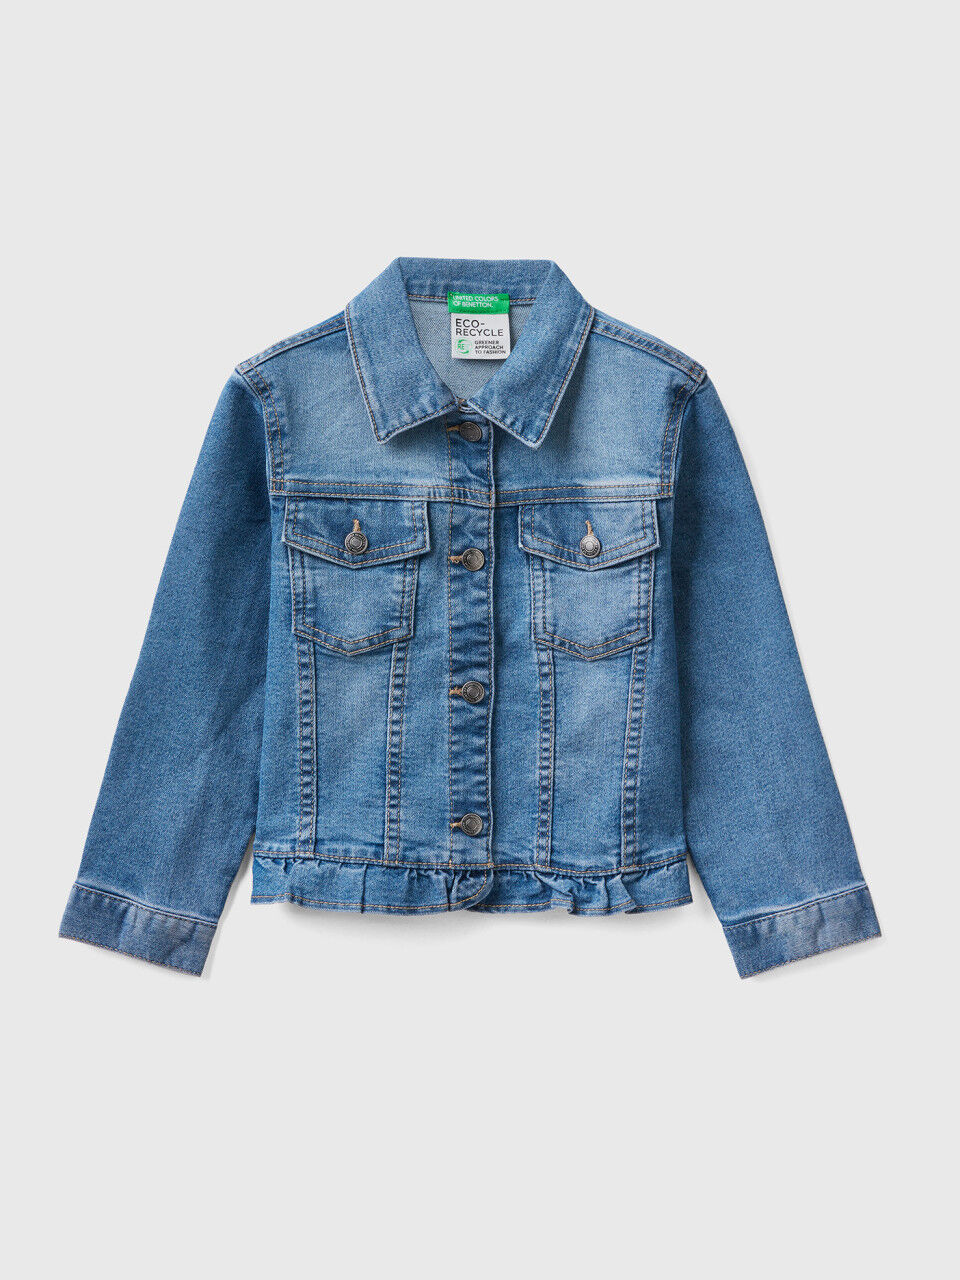 "Eco-Recycle" jean jacket